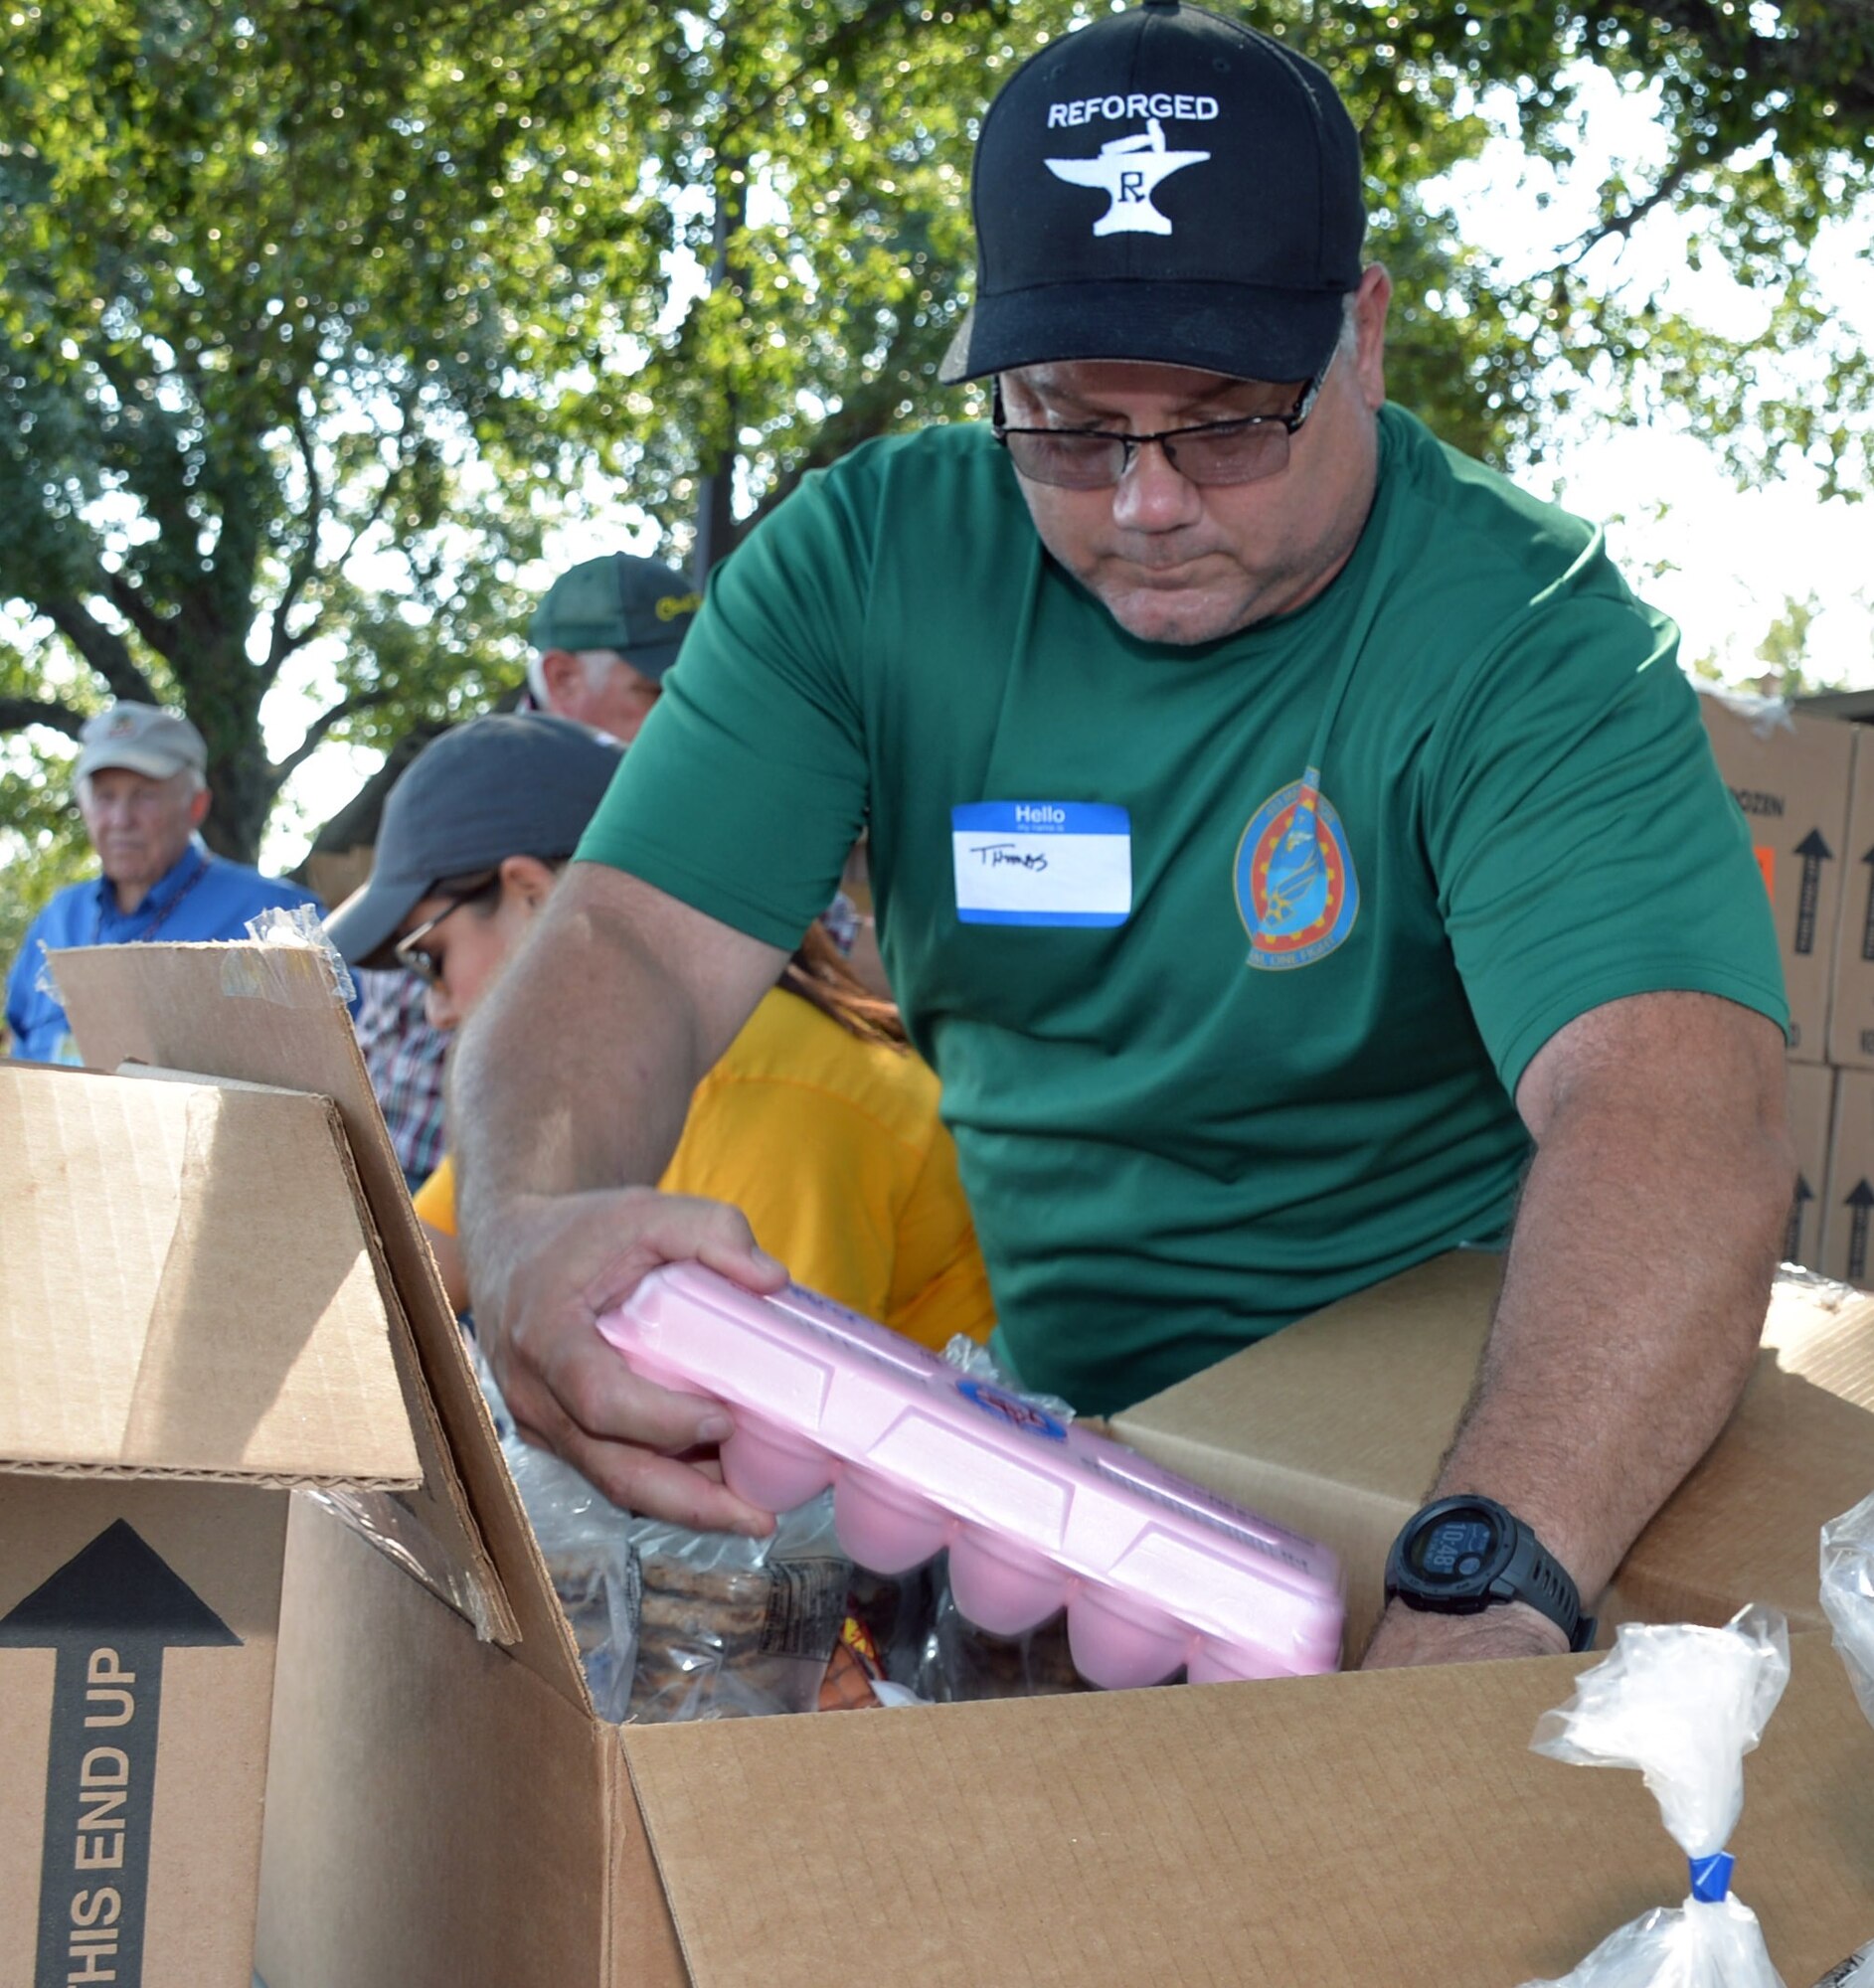 Master Sgt. Thomas Taylor Jr., 433rd Maintenance Squadron aerospace ground equipment technician, assembles packages of cold and frozen goods during a San Antonio Food Bank distribution event at Windcrest United Methodist Church Sept. 19. Fifteen Reserve Citizen Airmen from the 433rd Airlift Wing and 960th Cyberspace Wing participated in three distribution events over two days.